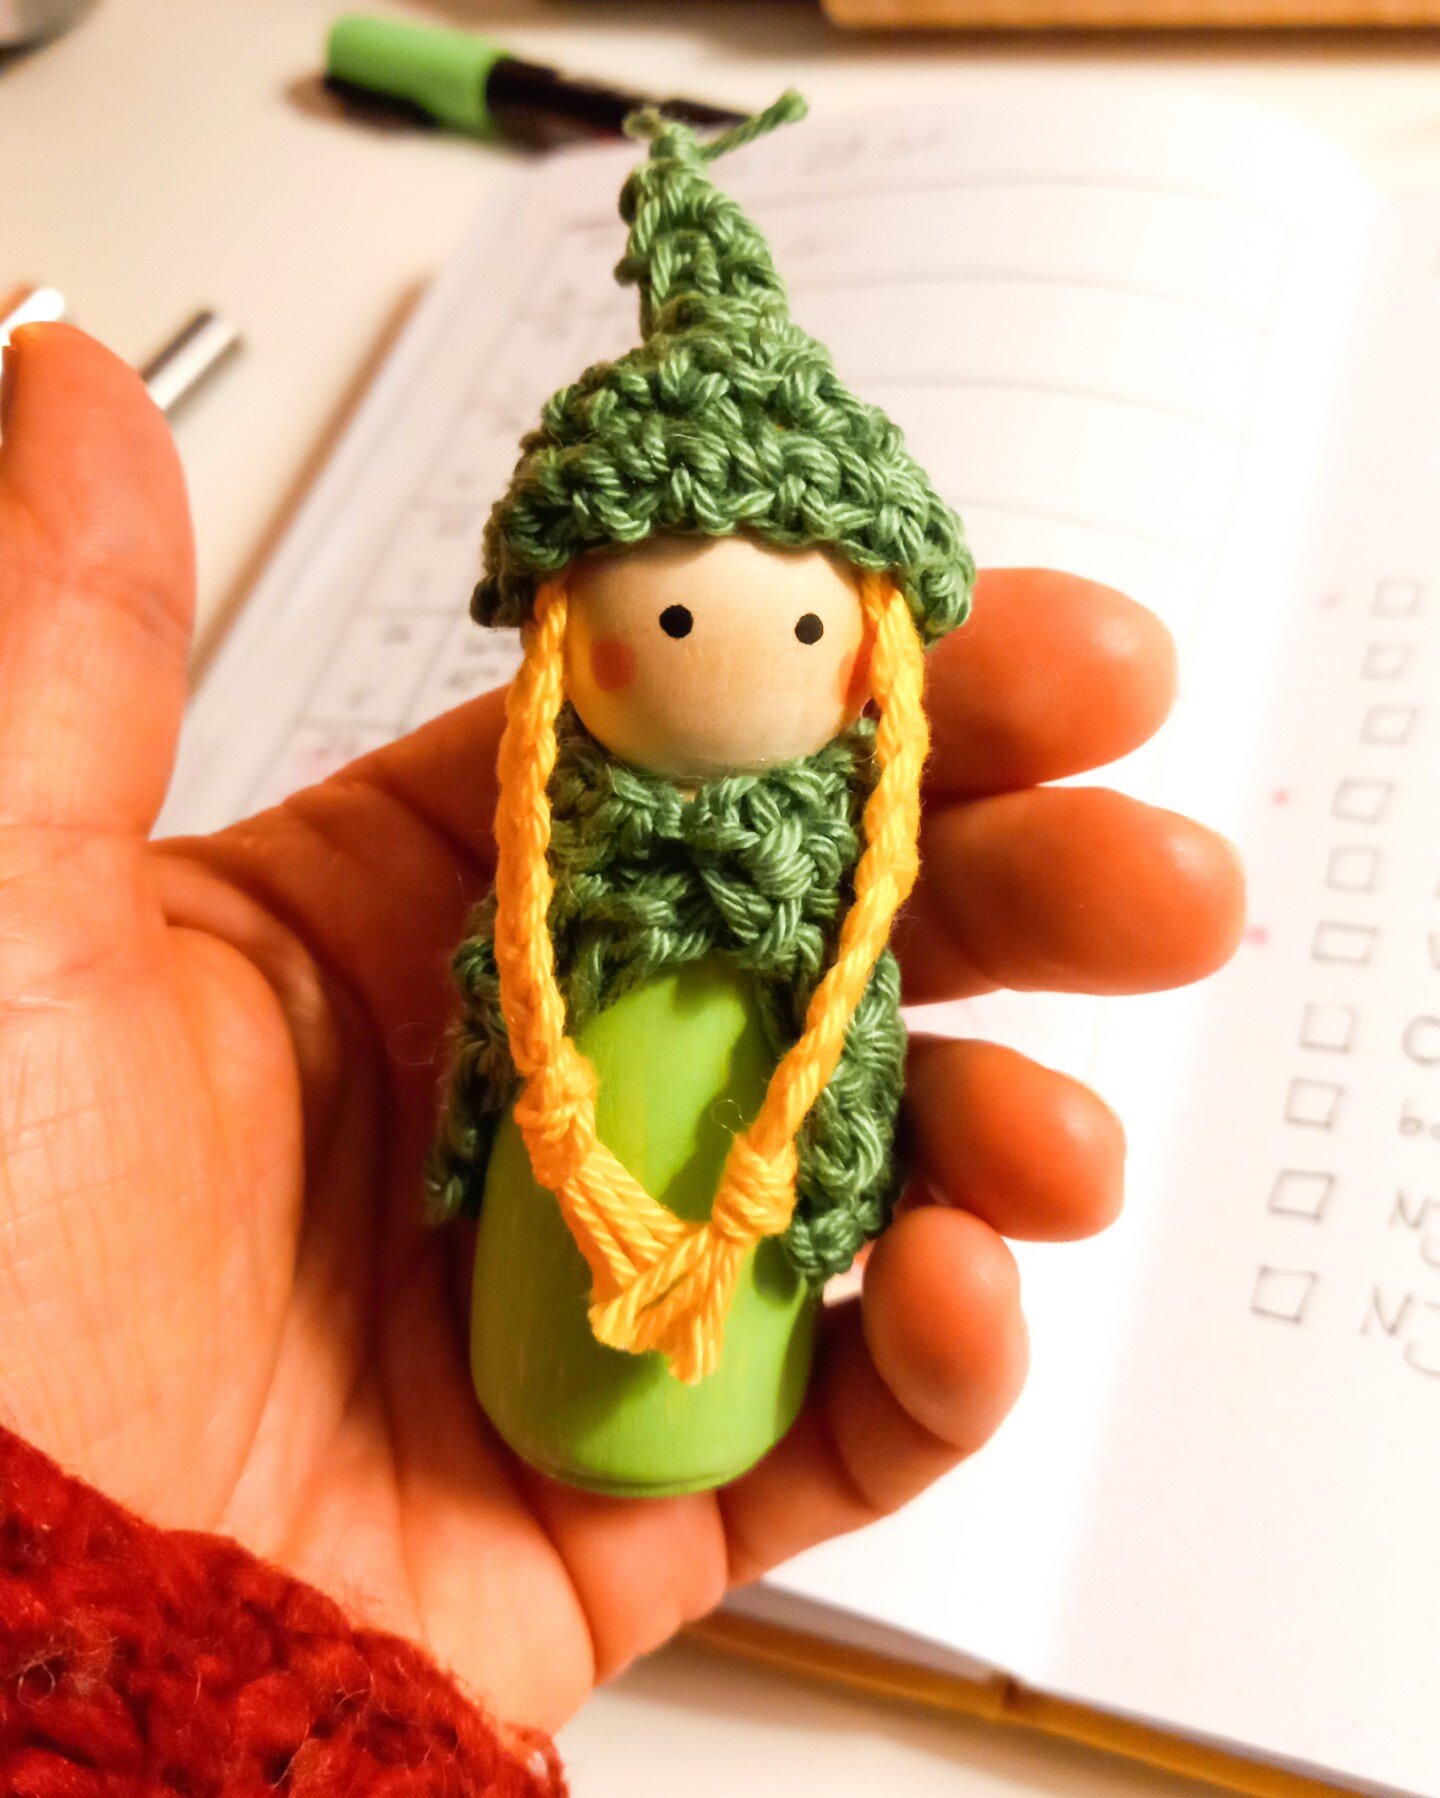 I got this idea from my nature education studies to make my own &quot;Where's Waldo&quot; type of photos where you hide a little forest gnome in nature and then the kids (or adults) have to find them. I crafted this peg doll for this project yesterda